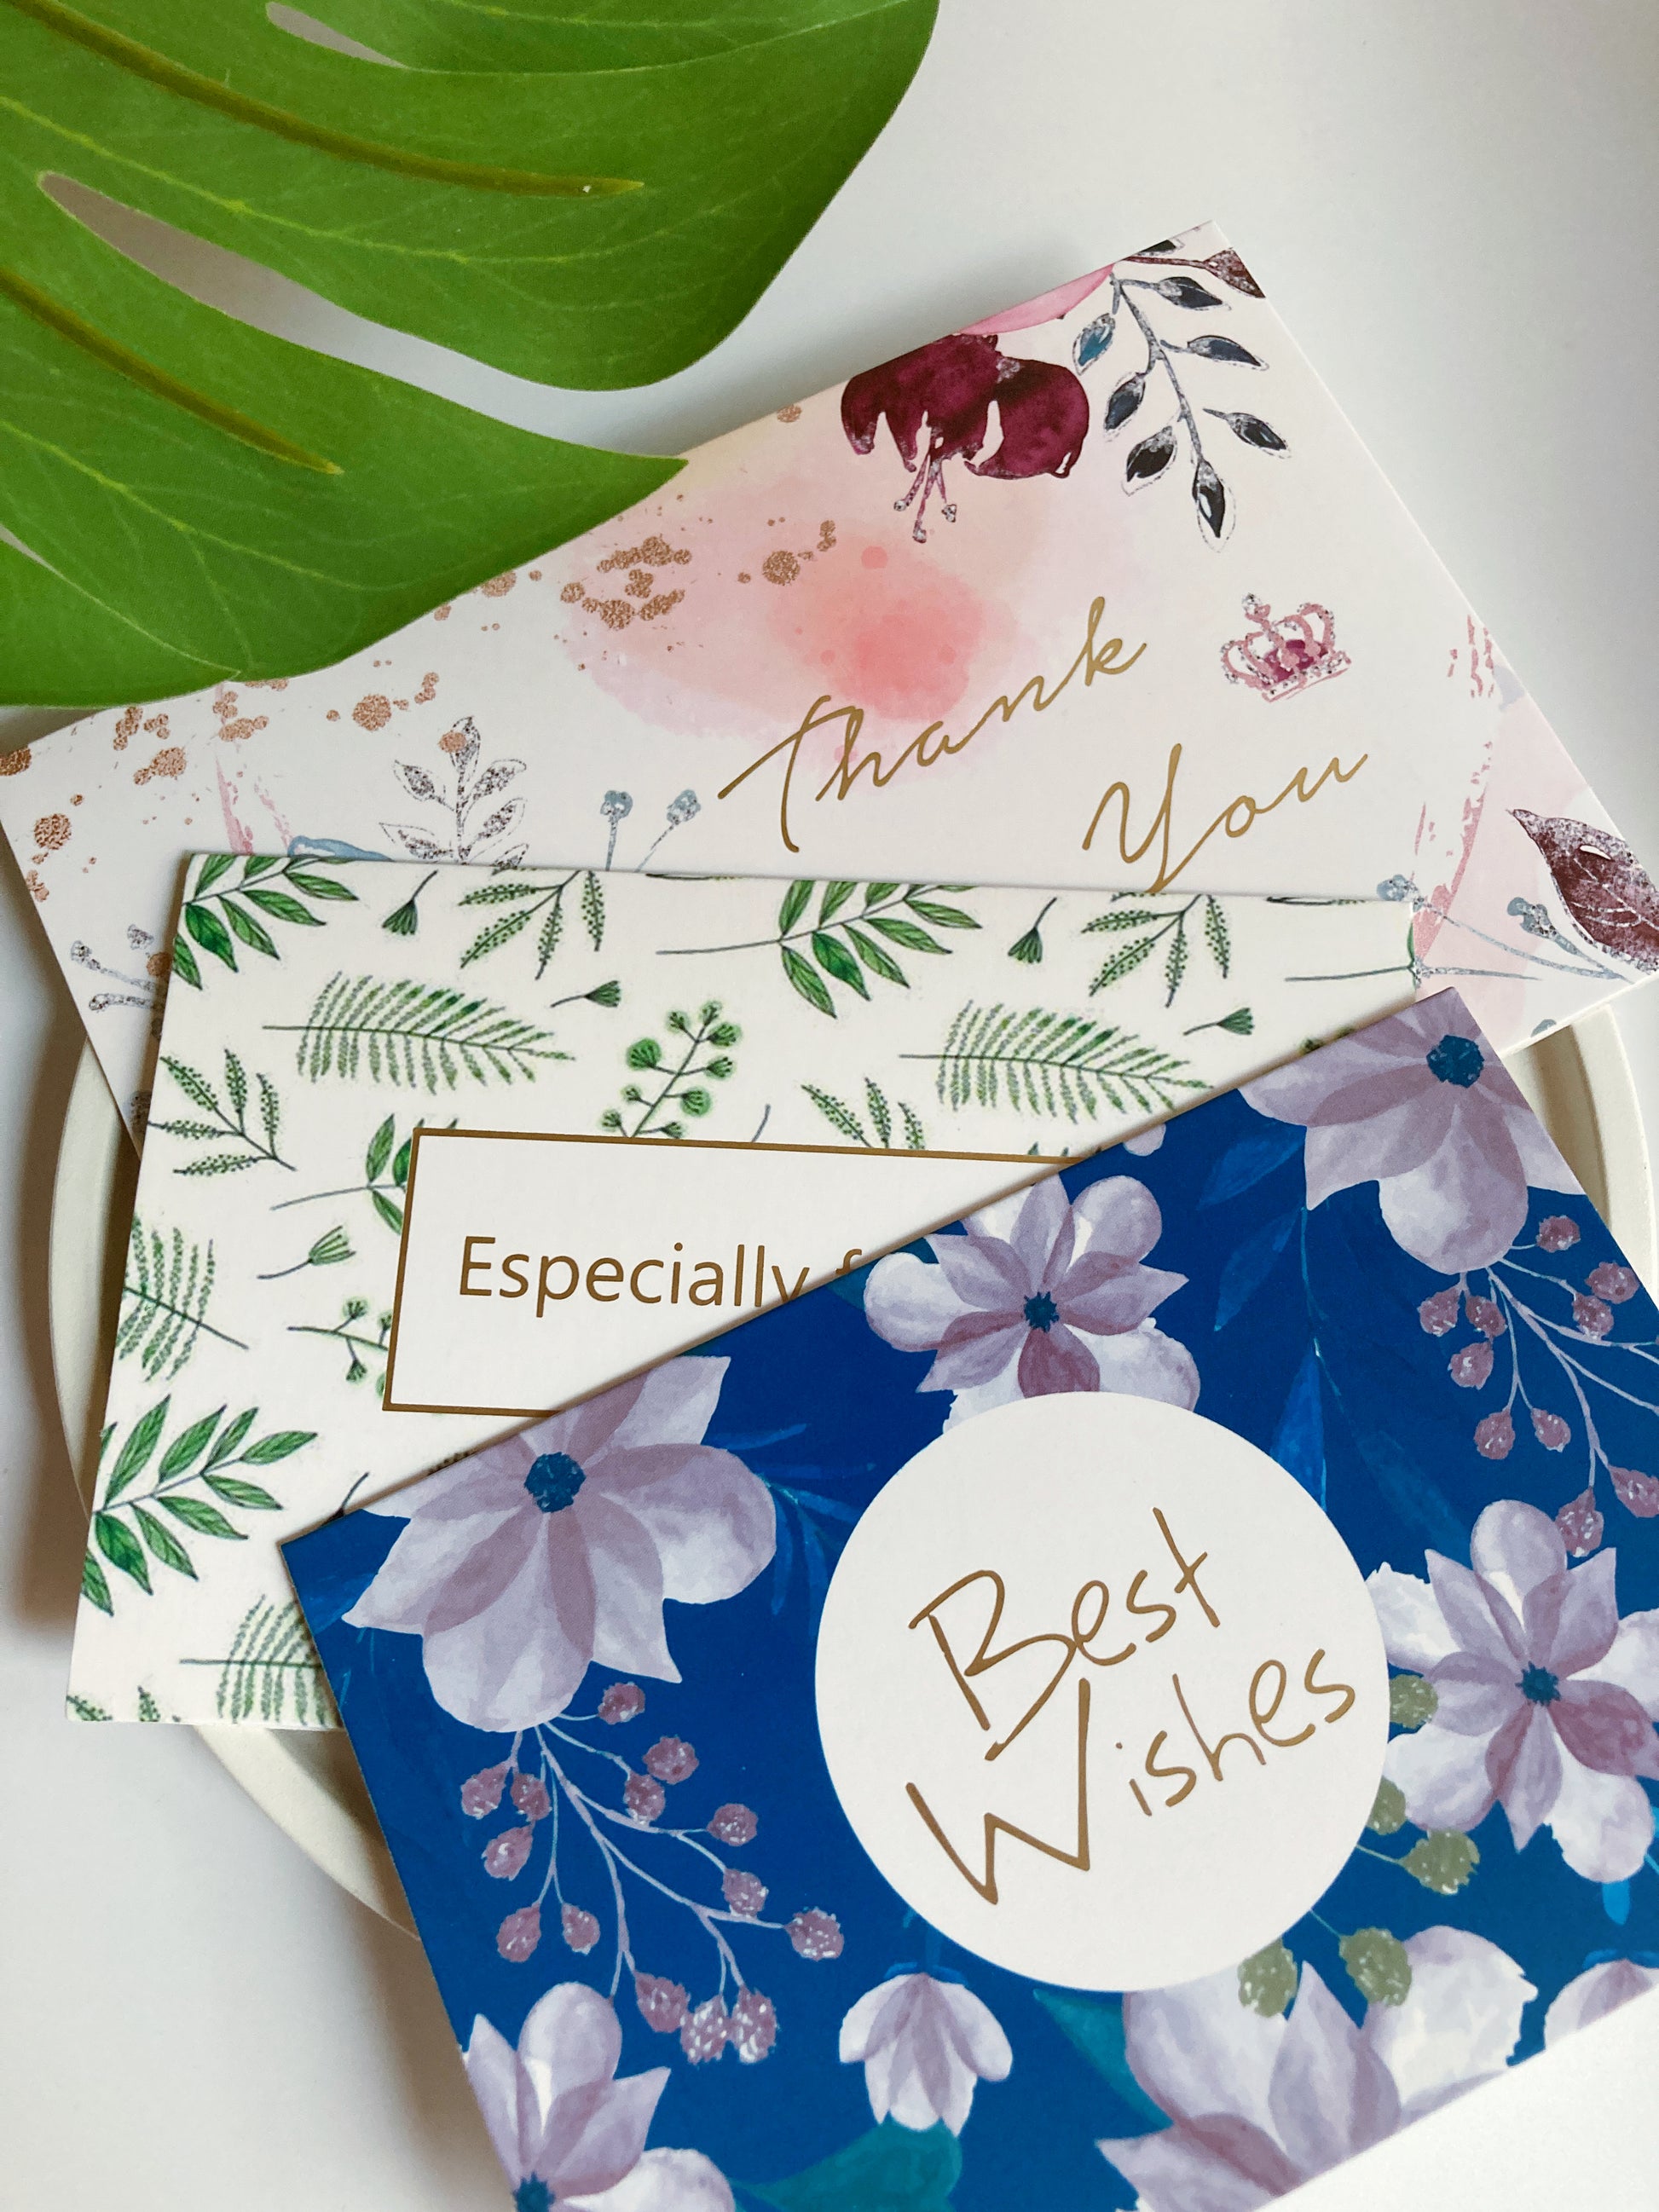 Free Greeting Cards that goes with every purchase